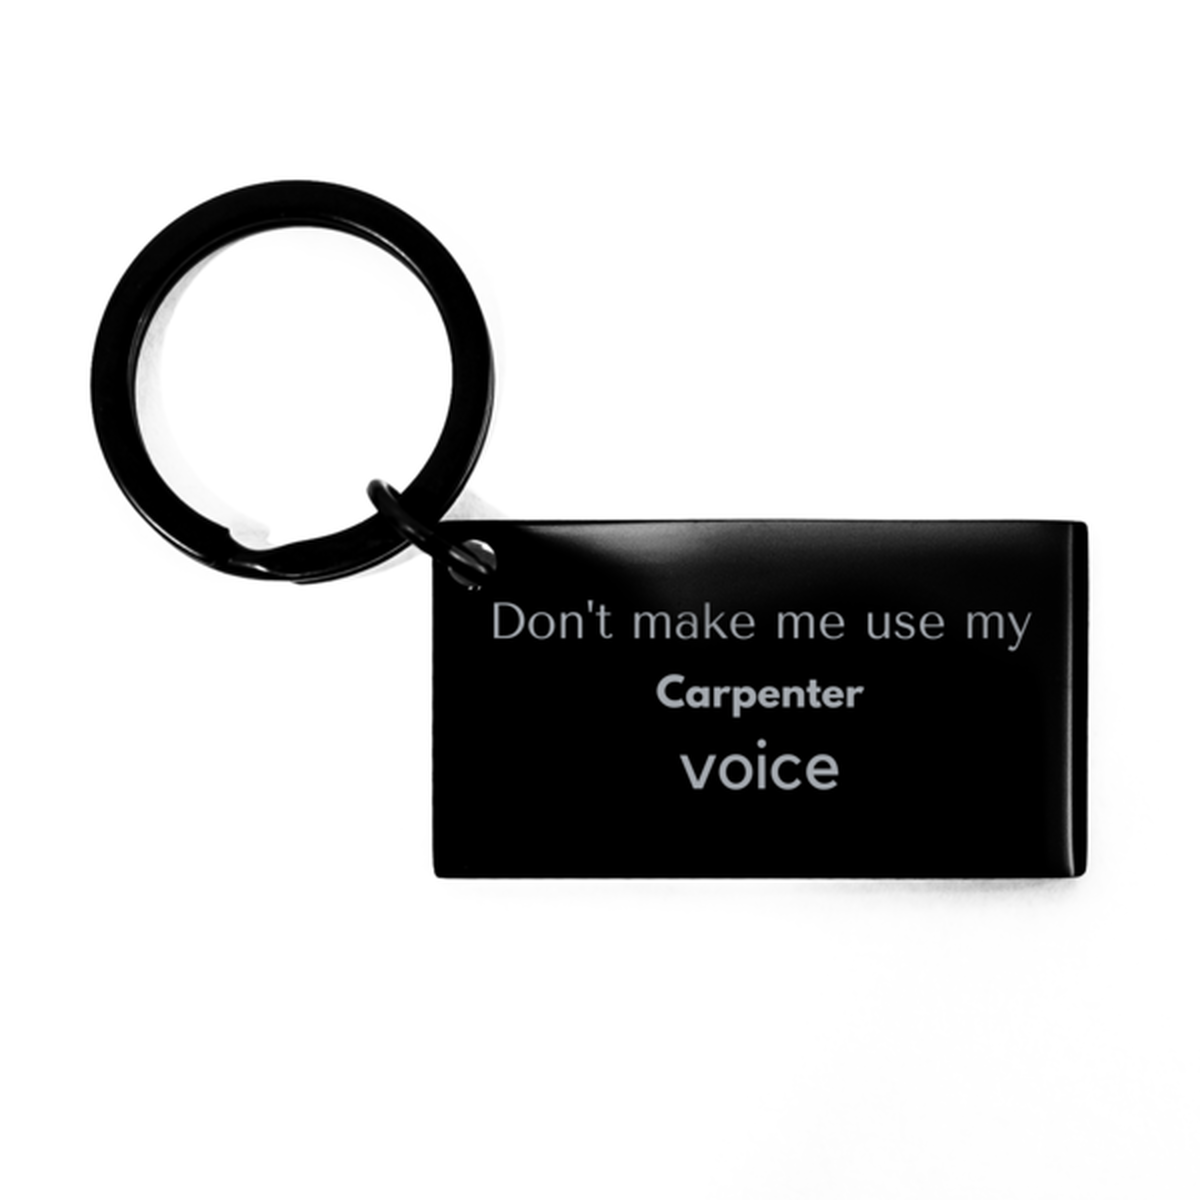 Don't make me use my Carpenter voice, Sarcasm Carpenter Gifts, Christmas Carpenter Keychain Birthday Unique Gifts For Carpenter Coworkers, Men, Women, Colleague, Friends